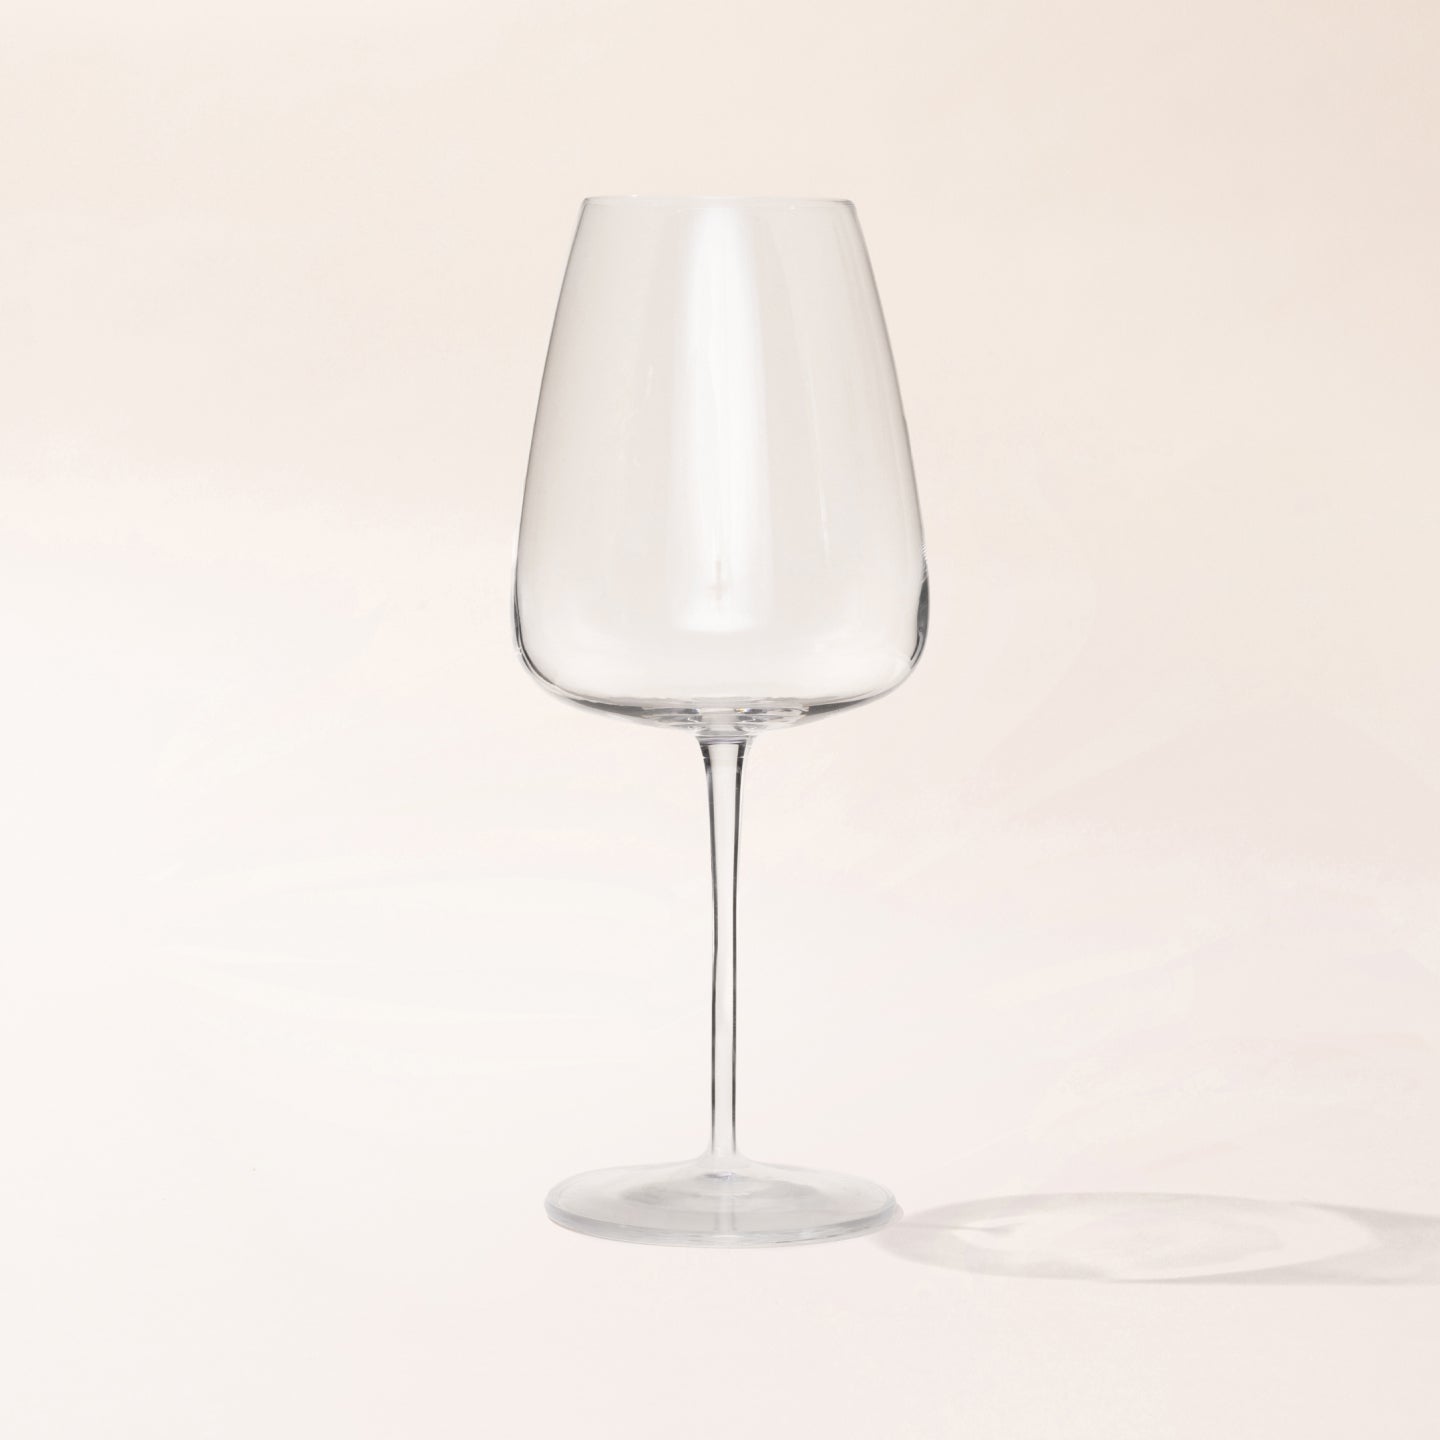 35 Different Types of Drinking Glasses & Their Uses